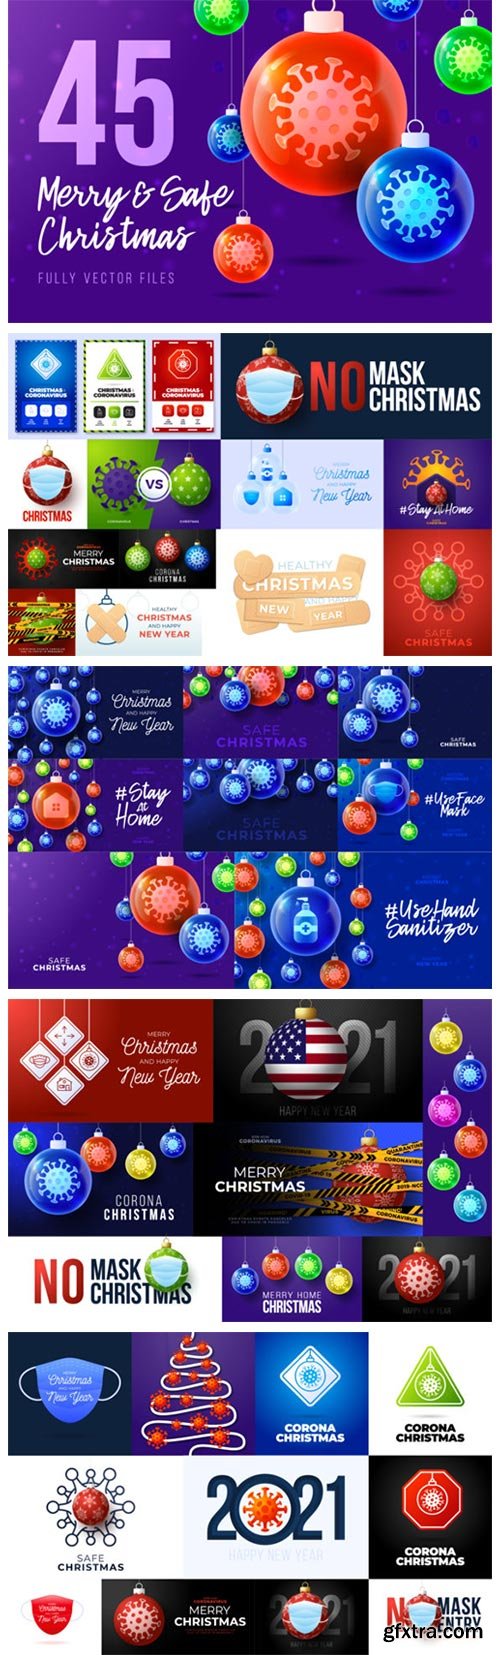 45 Merry and Safe Christmas Banners 6408378